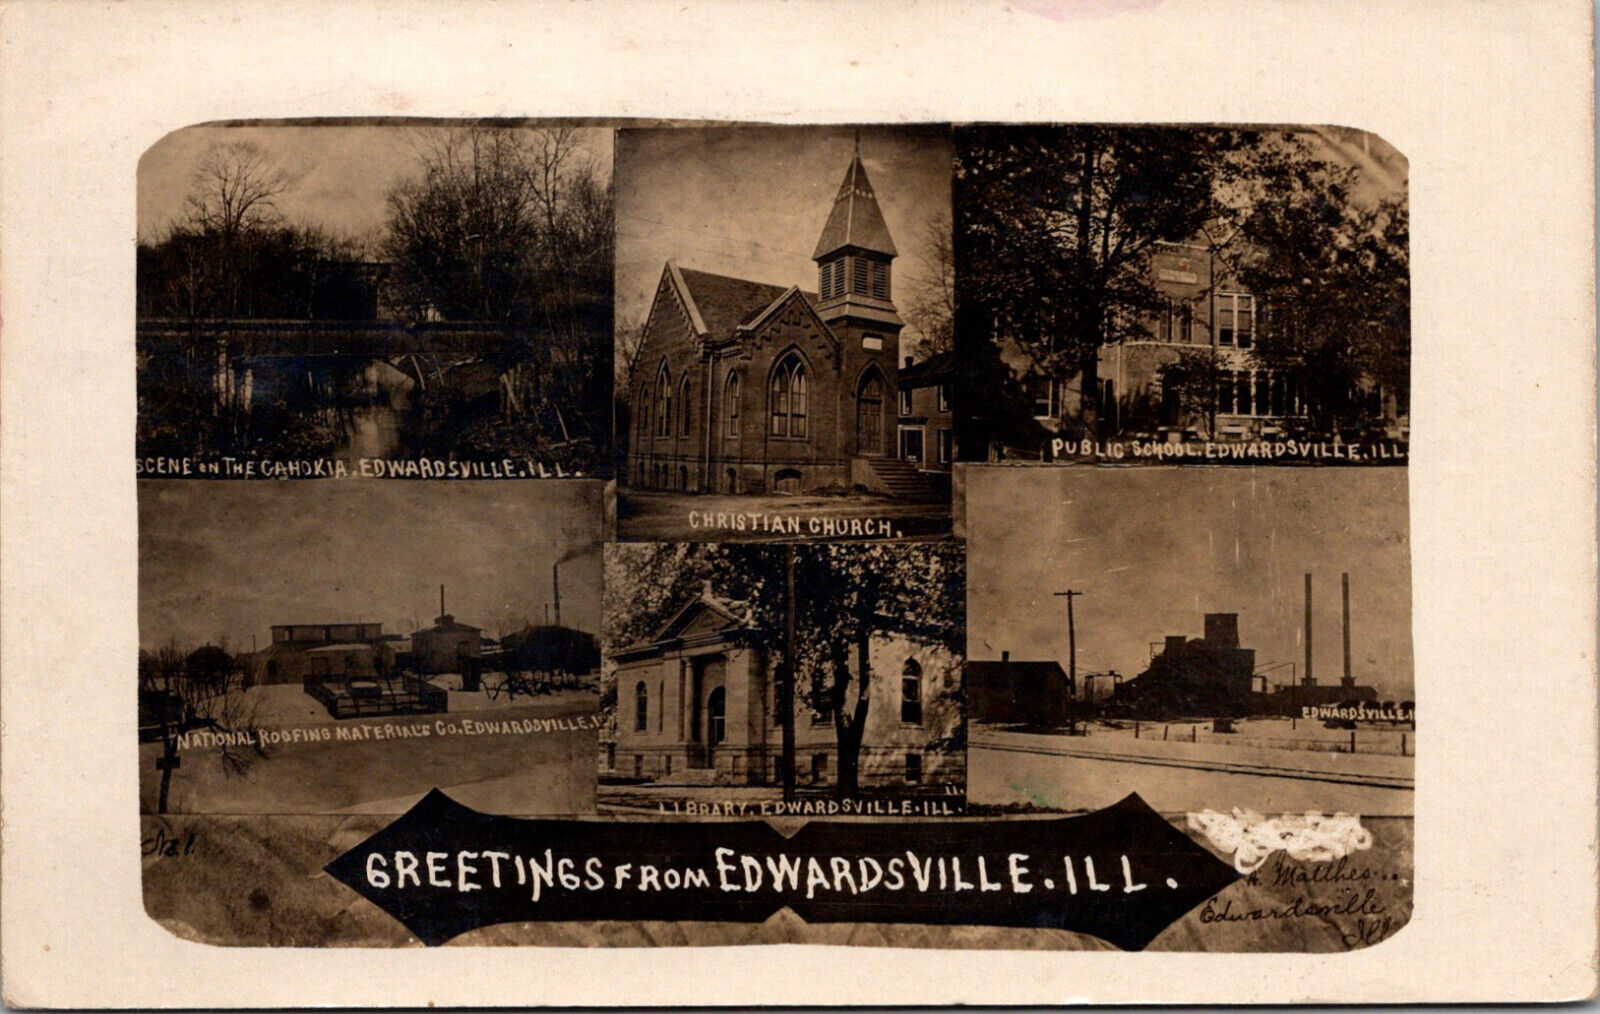 MANNSVILLE, NEW YORK - OUR HOME - LARGE RESIDENCE - OLD REAL PHOTO POSTCARD